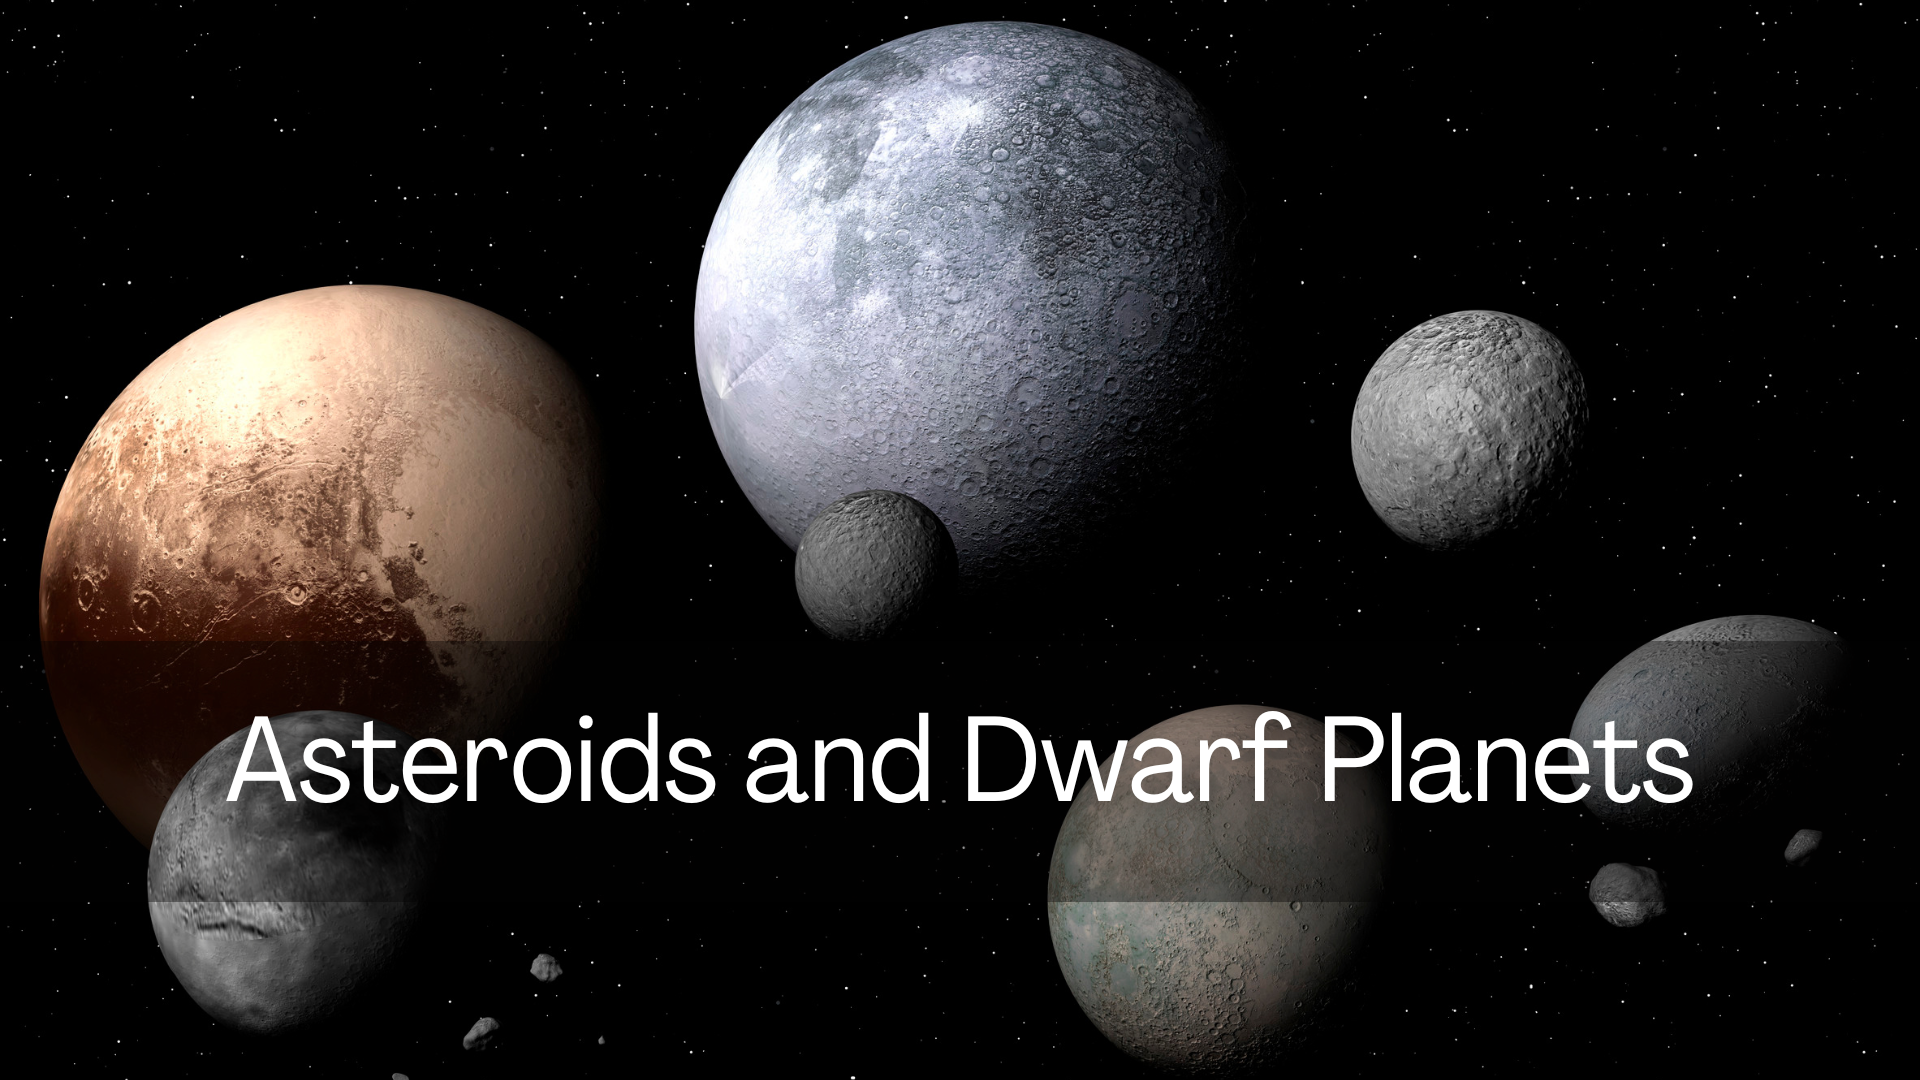 Asteroids and Dwarf Planets